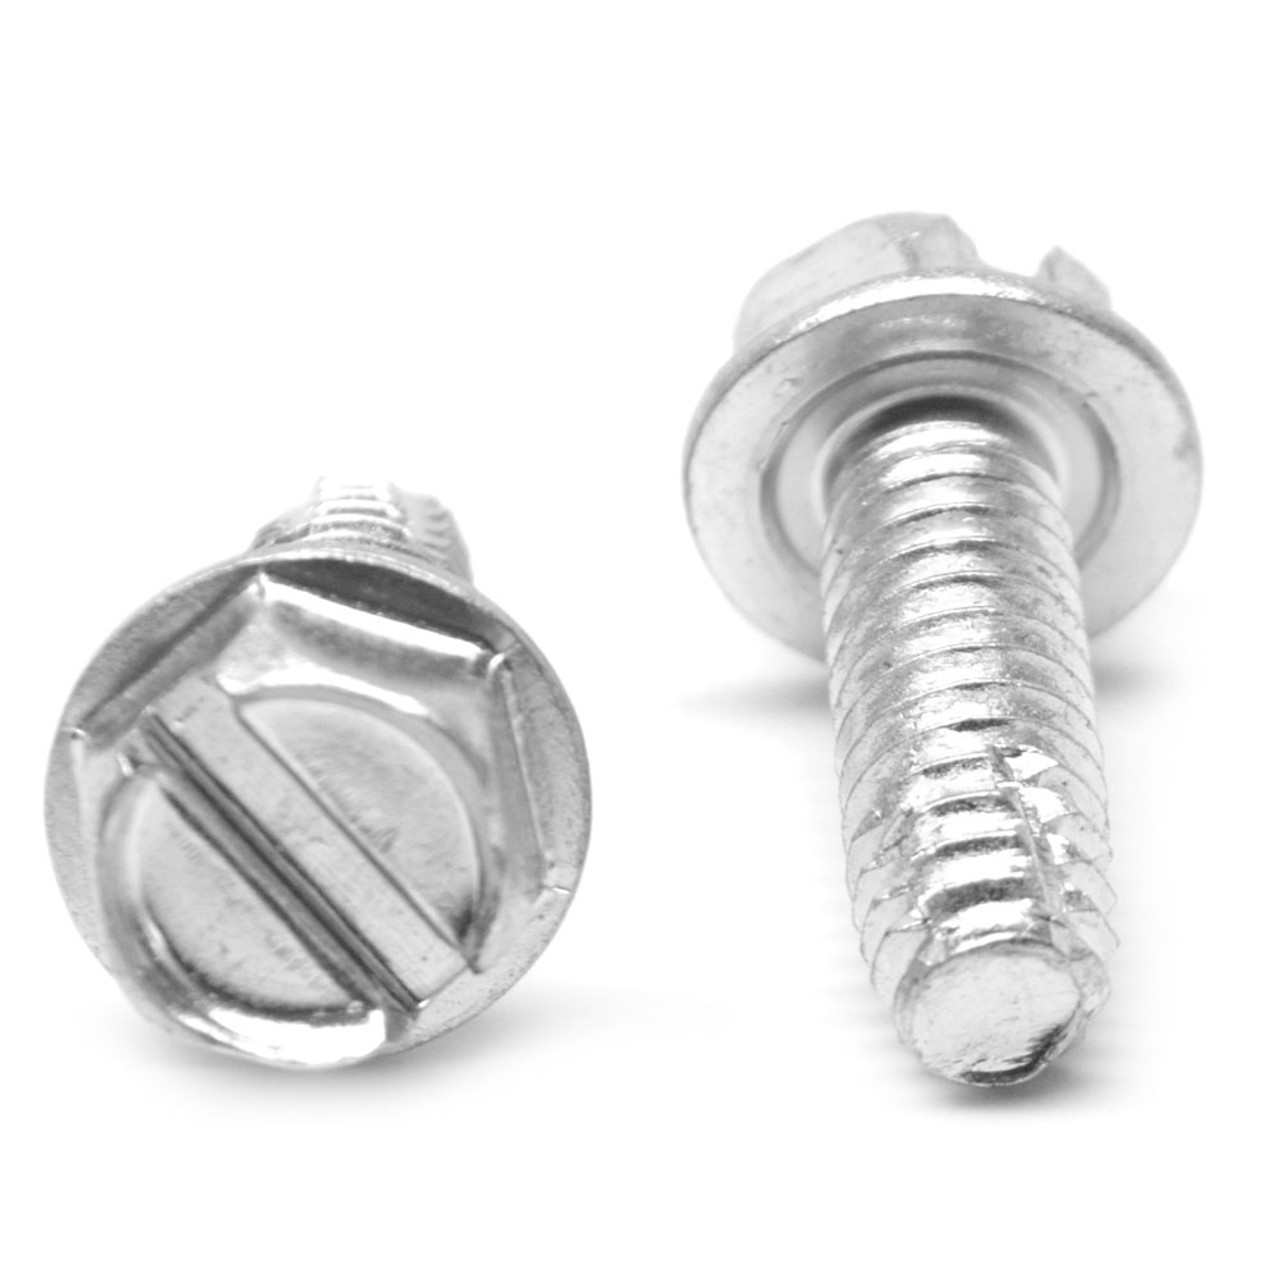 1/4-20 x 3 Coarse Thread Thread Cutting Screw Slotted Hex Washer Head Type F Low Carbon Steel Zinc Plated